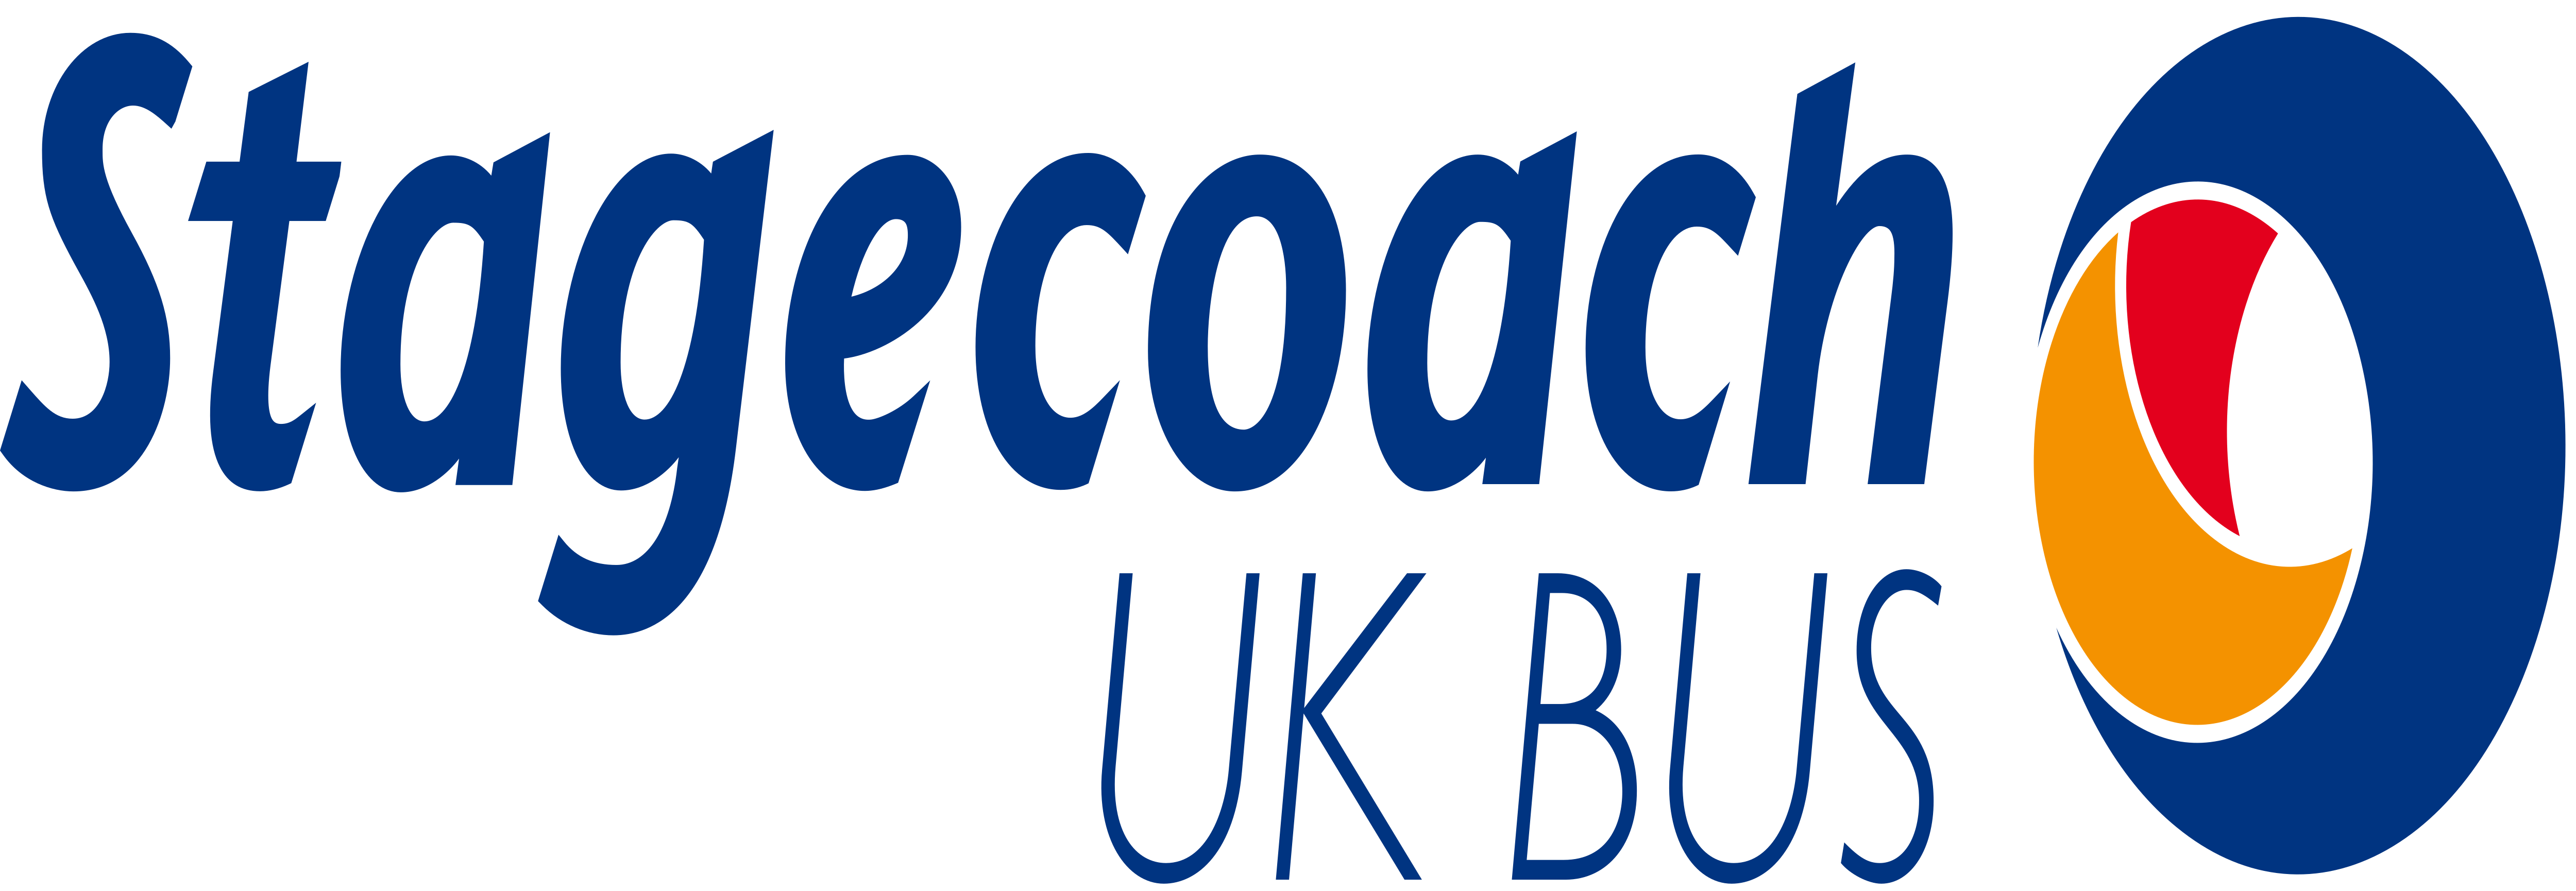 Stagecoach Logo - Stagecoach – Logos Download